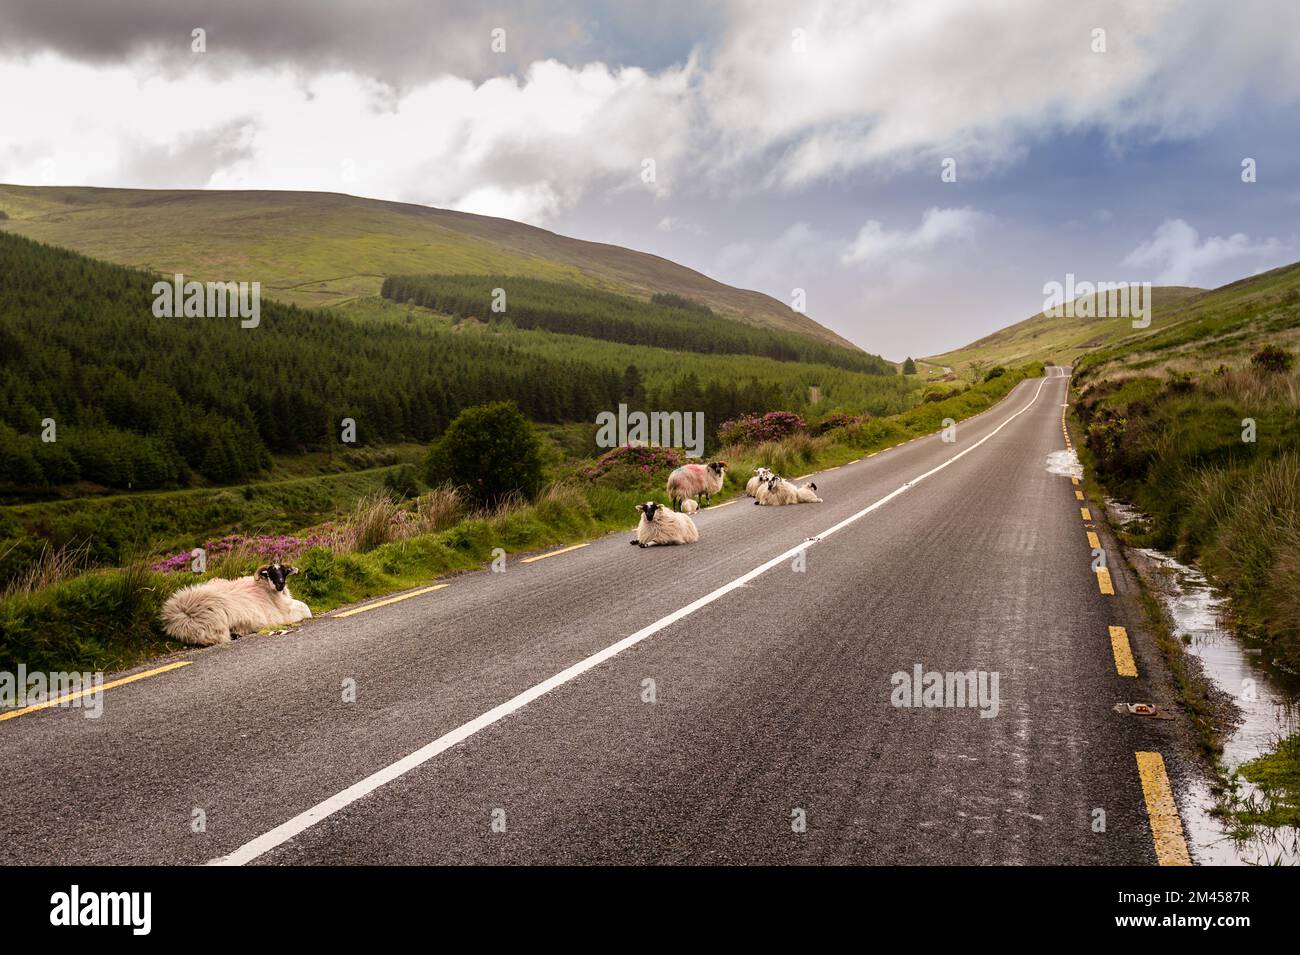 Mountain sheep rest on scenic rural road along the Vee Pass in Knockmealdown mountains, Tipperary. Stock Photo